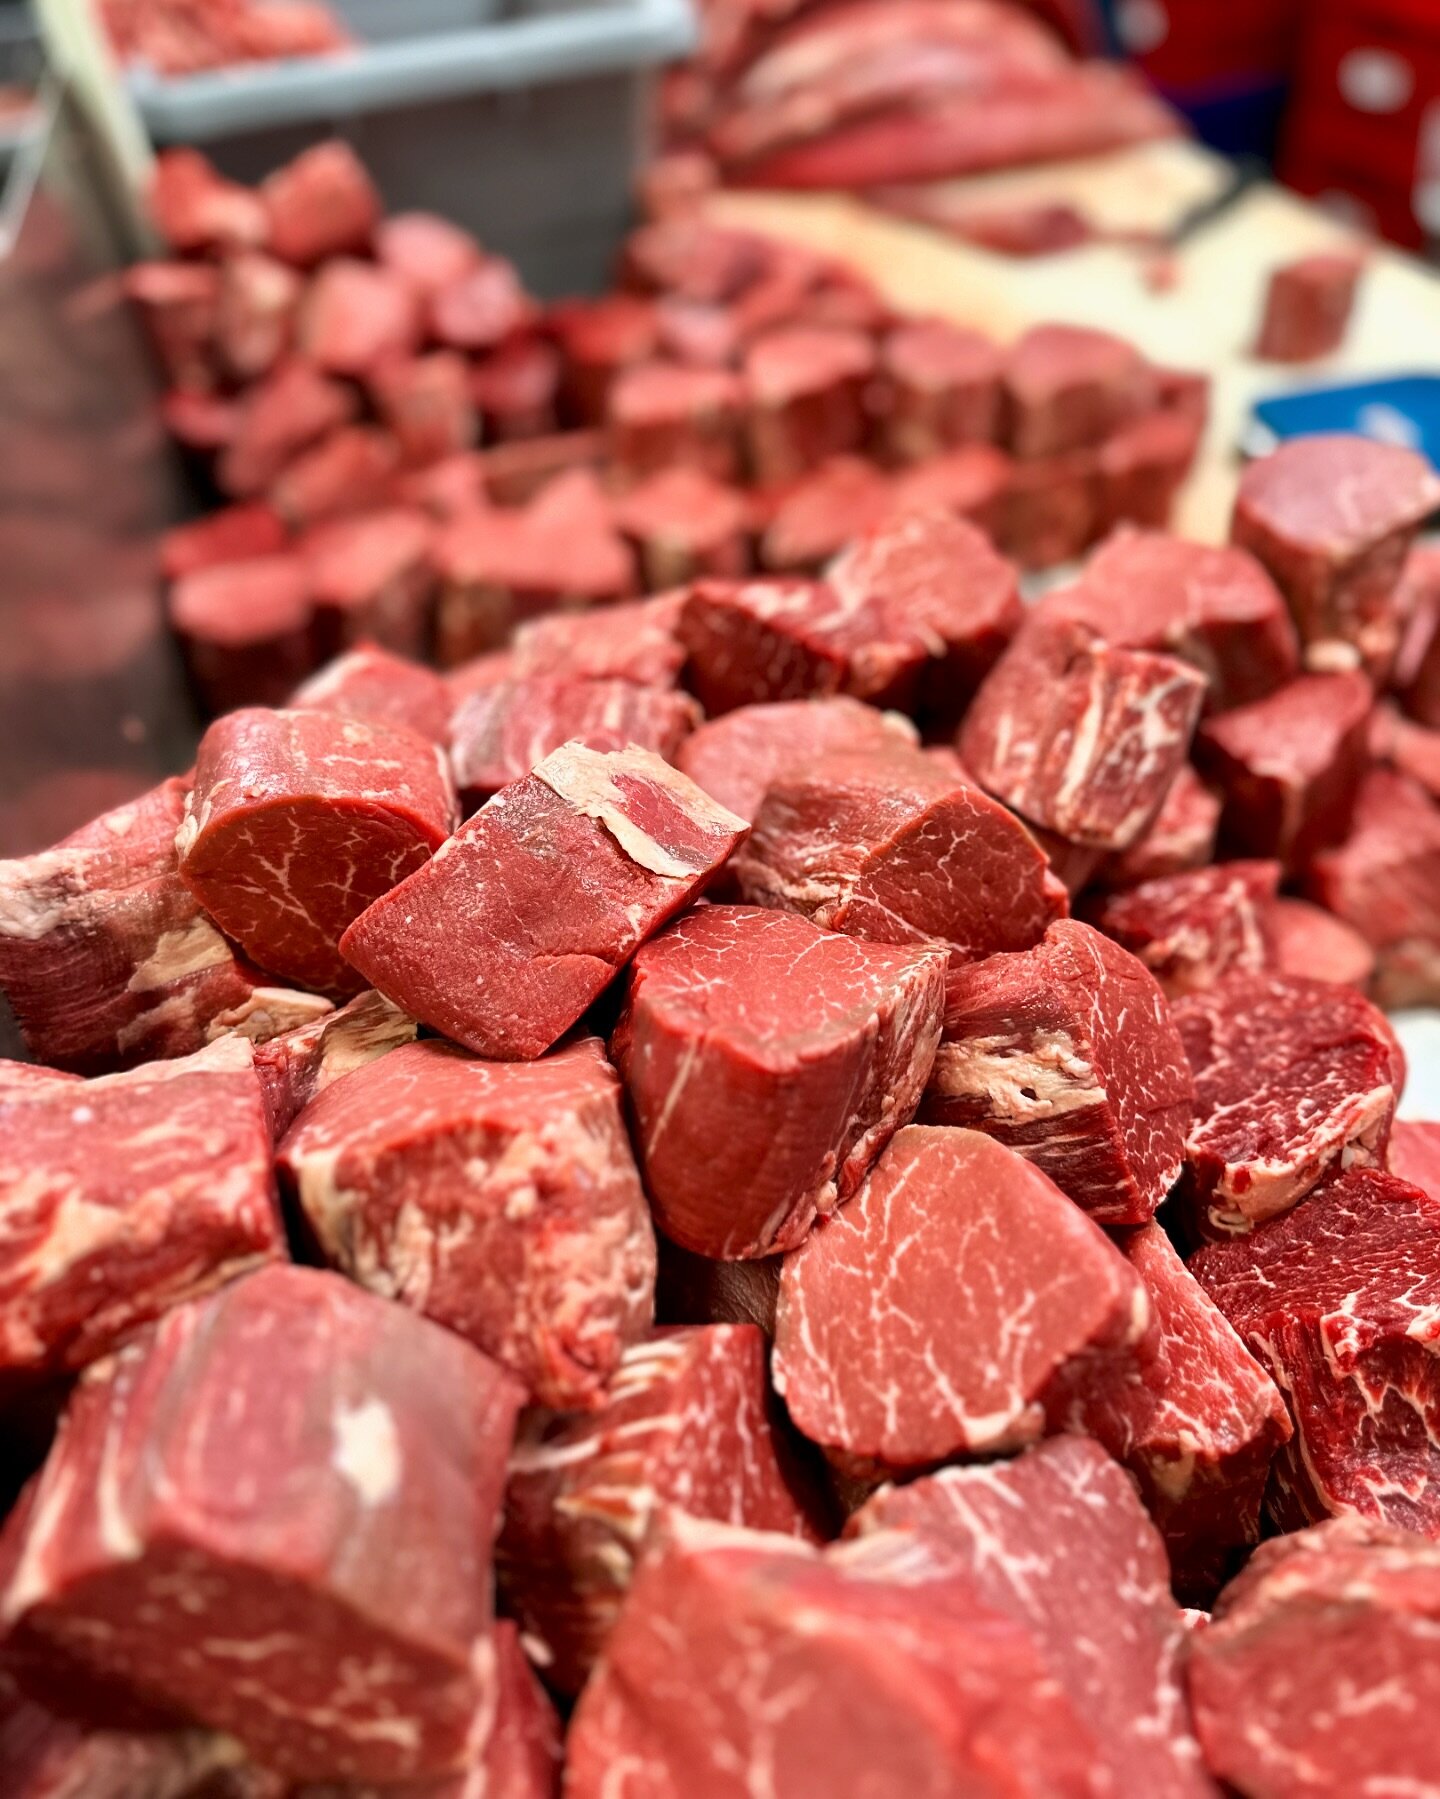 Feels like we have the luck of the Irish behind us with our amazing clients, vendors, and team 🍀

#bushbrothers #bushbros #filet #filetmignon #tenderloin